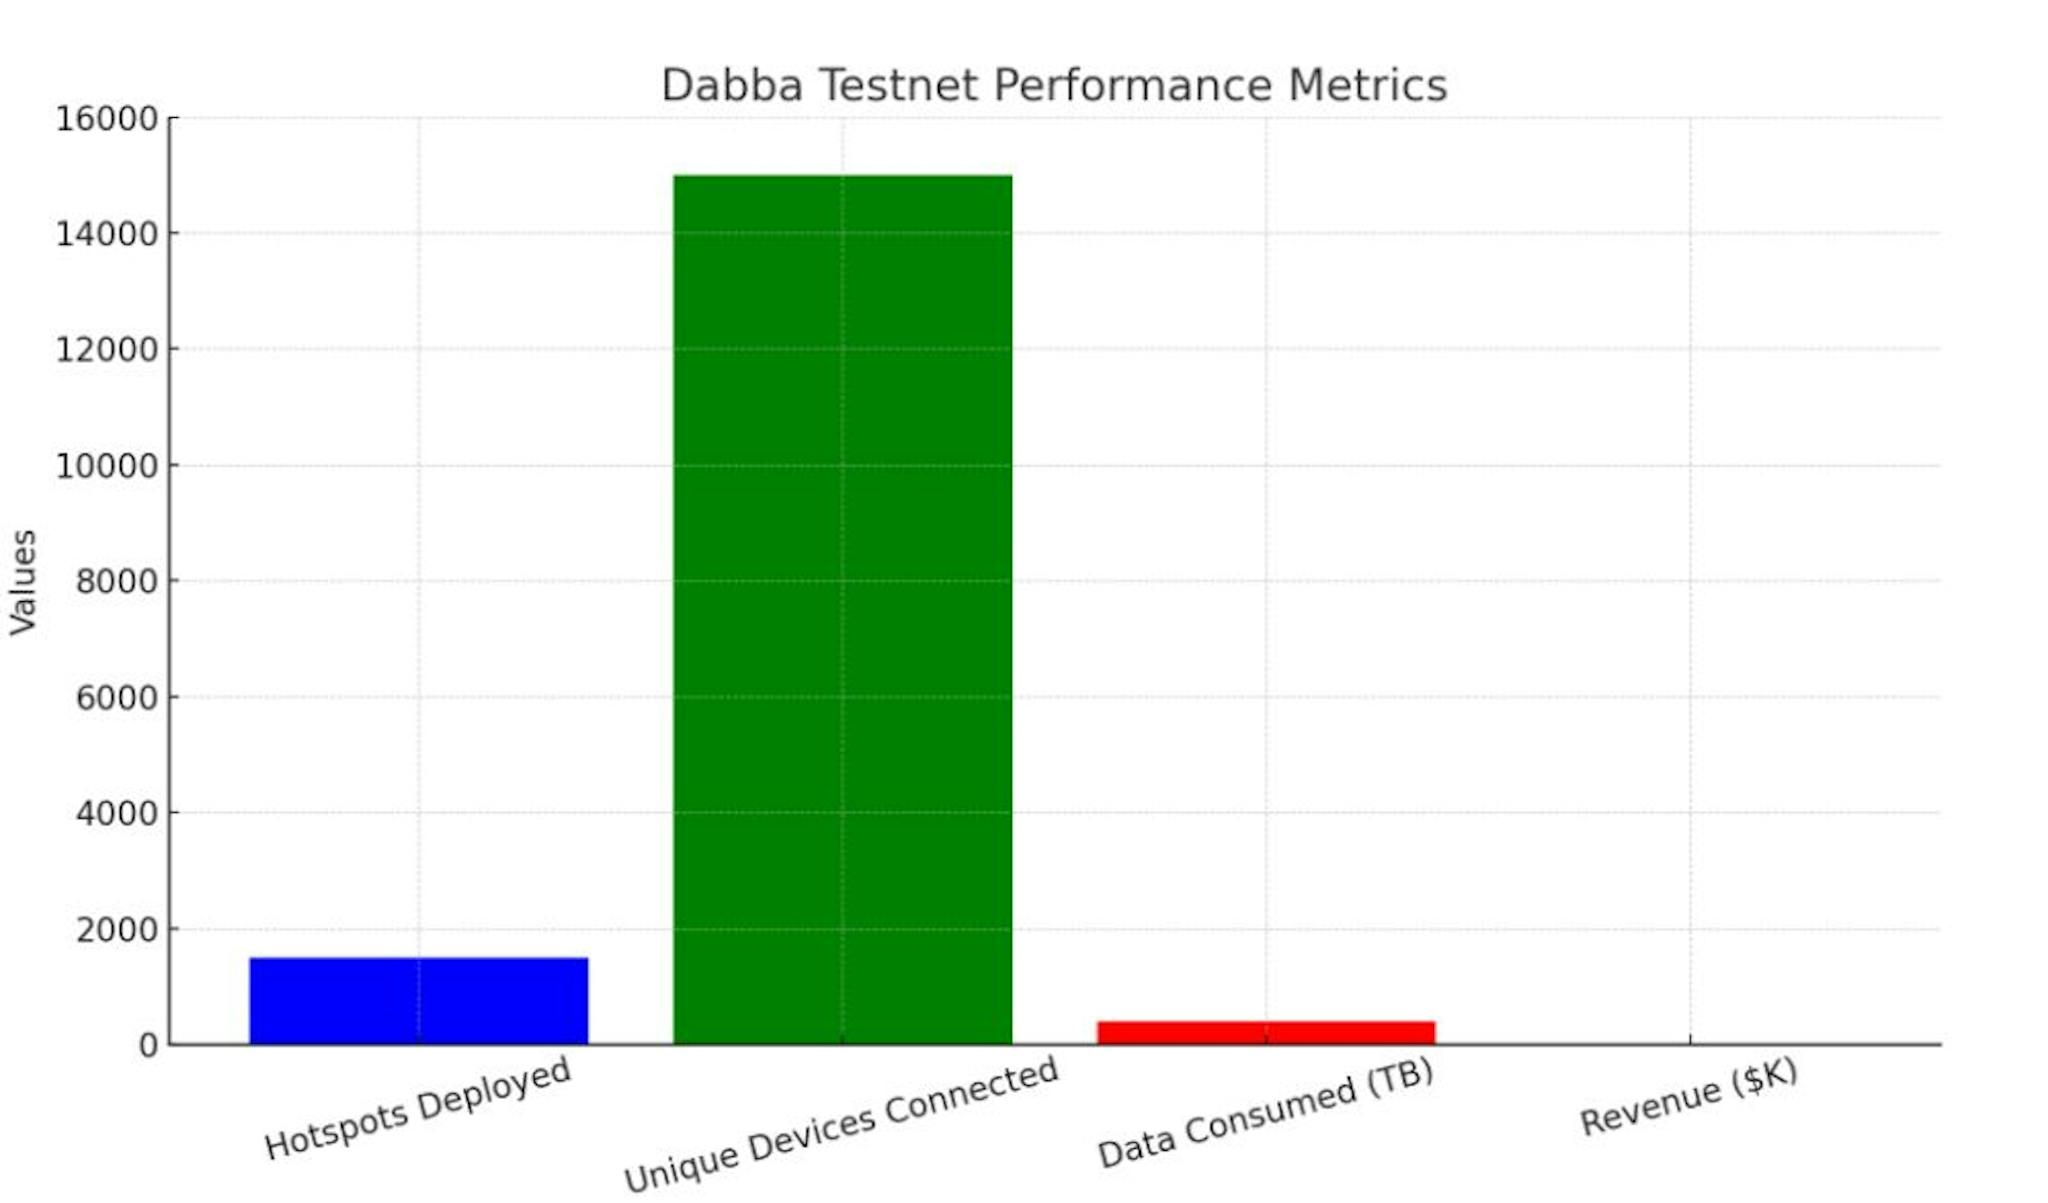 Key performance metrics from the Dabba testnet over the past two months